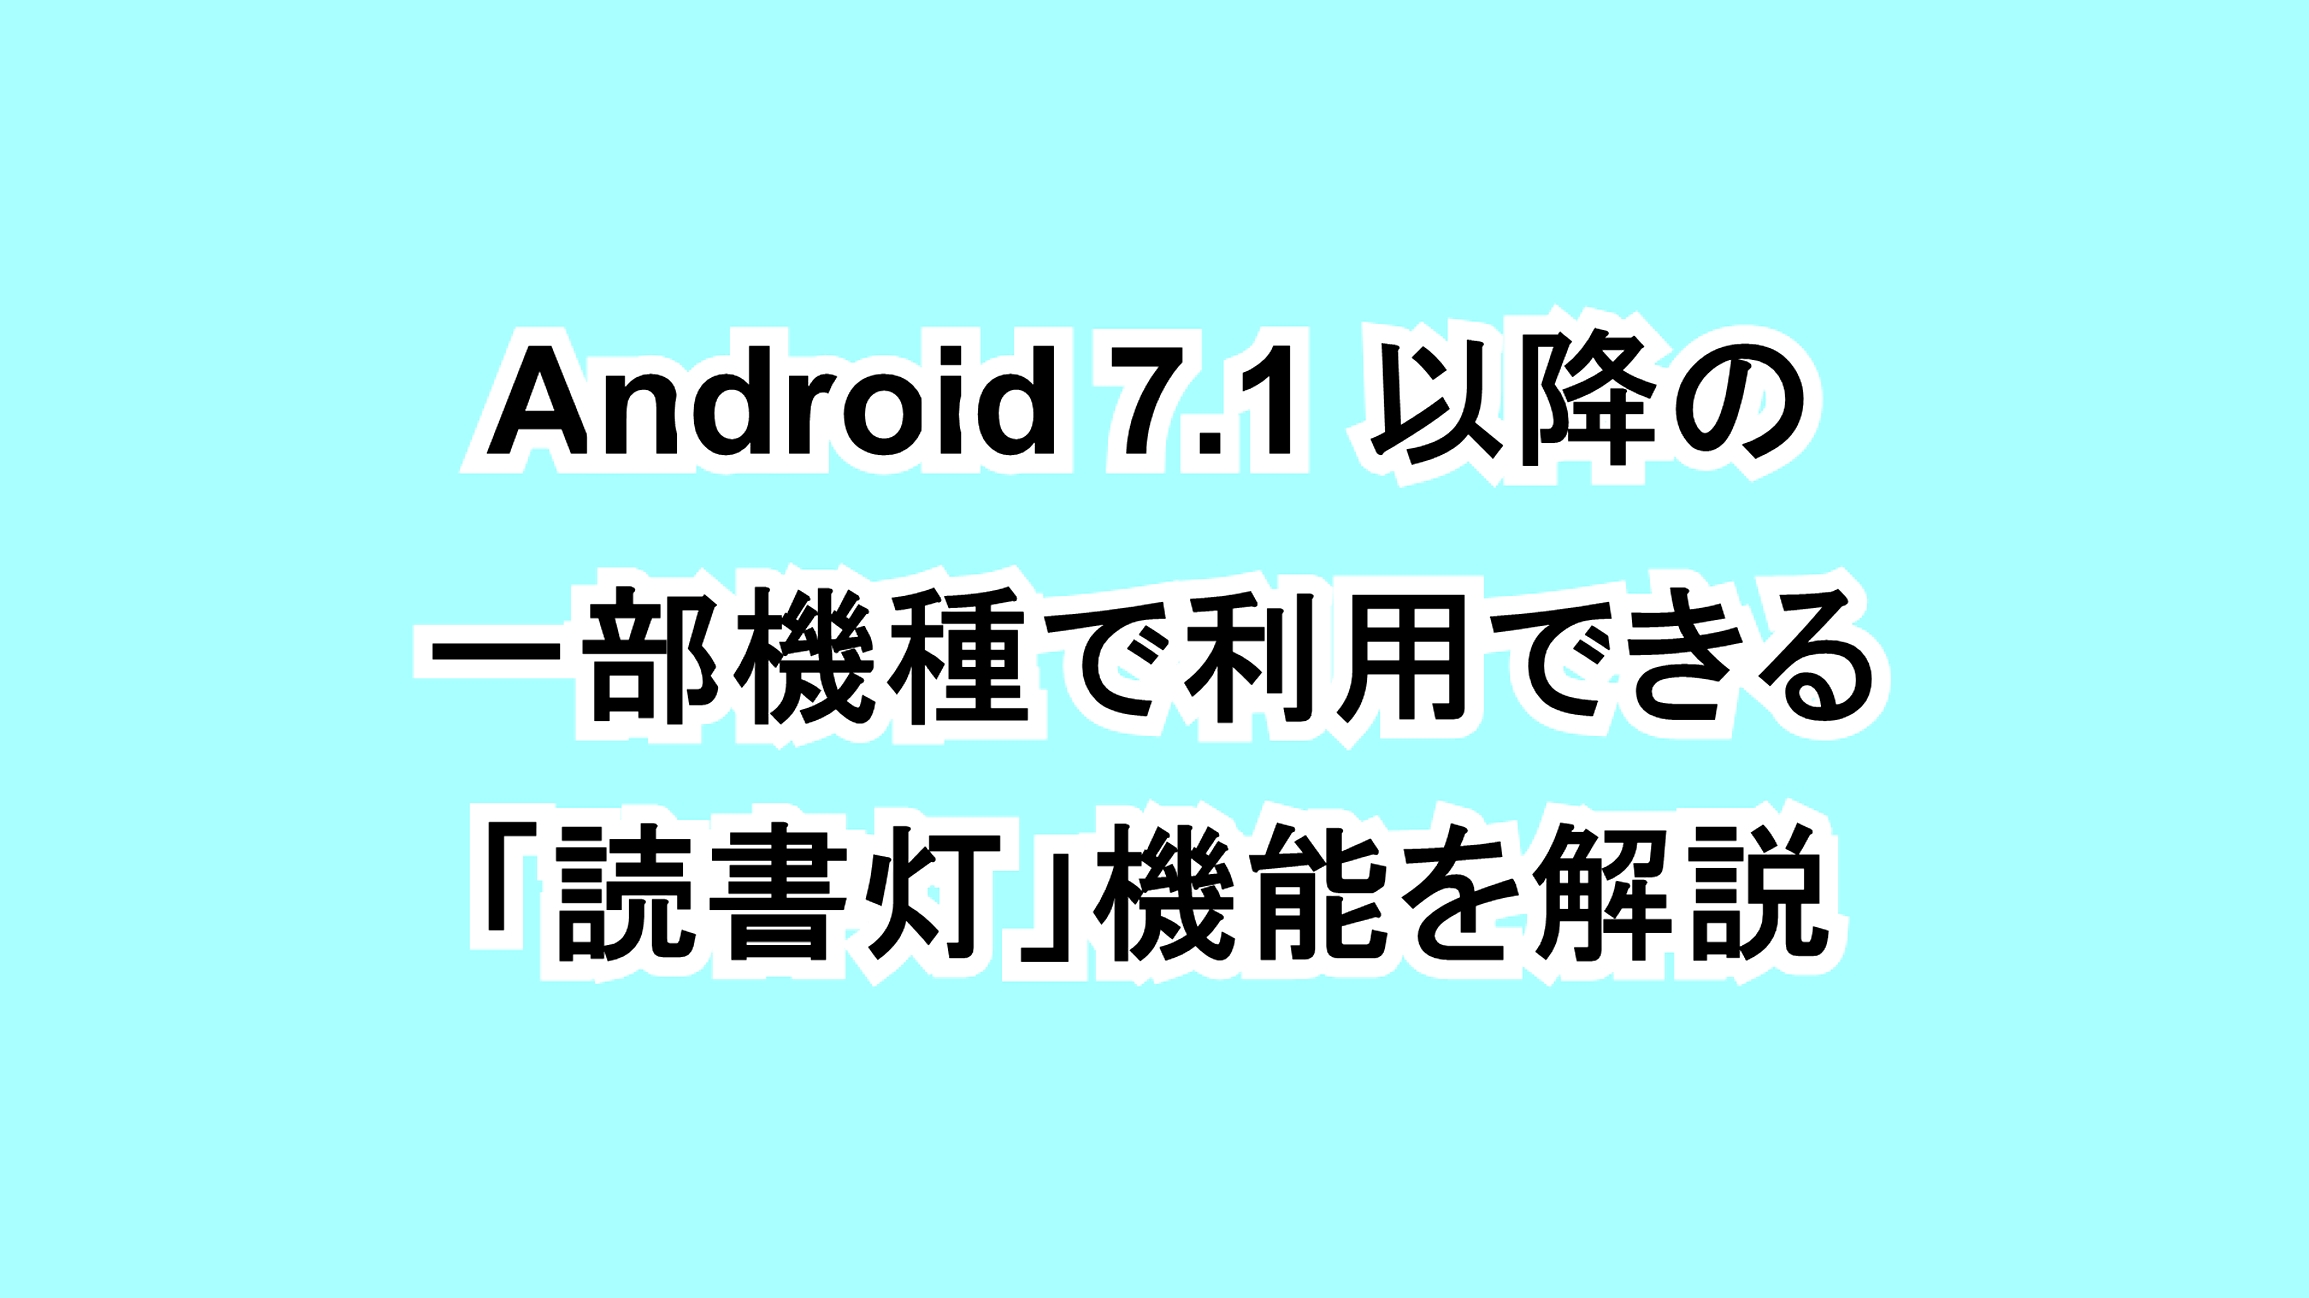 Android 7.1以降の一部機種で利用できる「読書灯」機能を解説